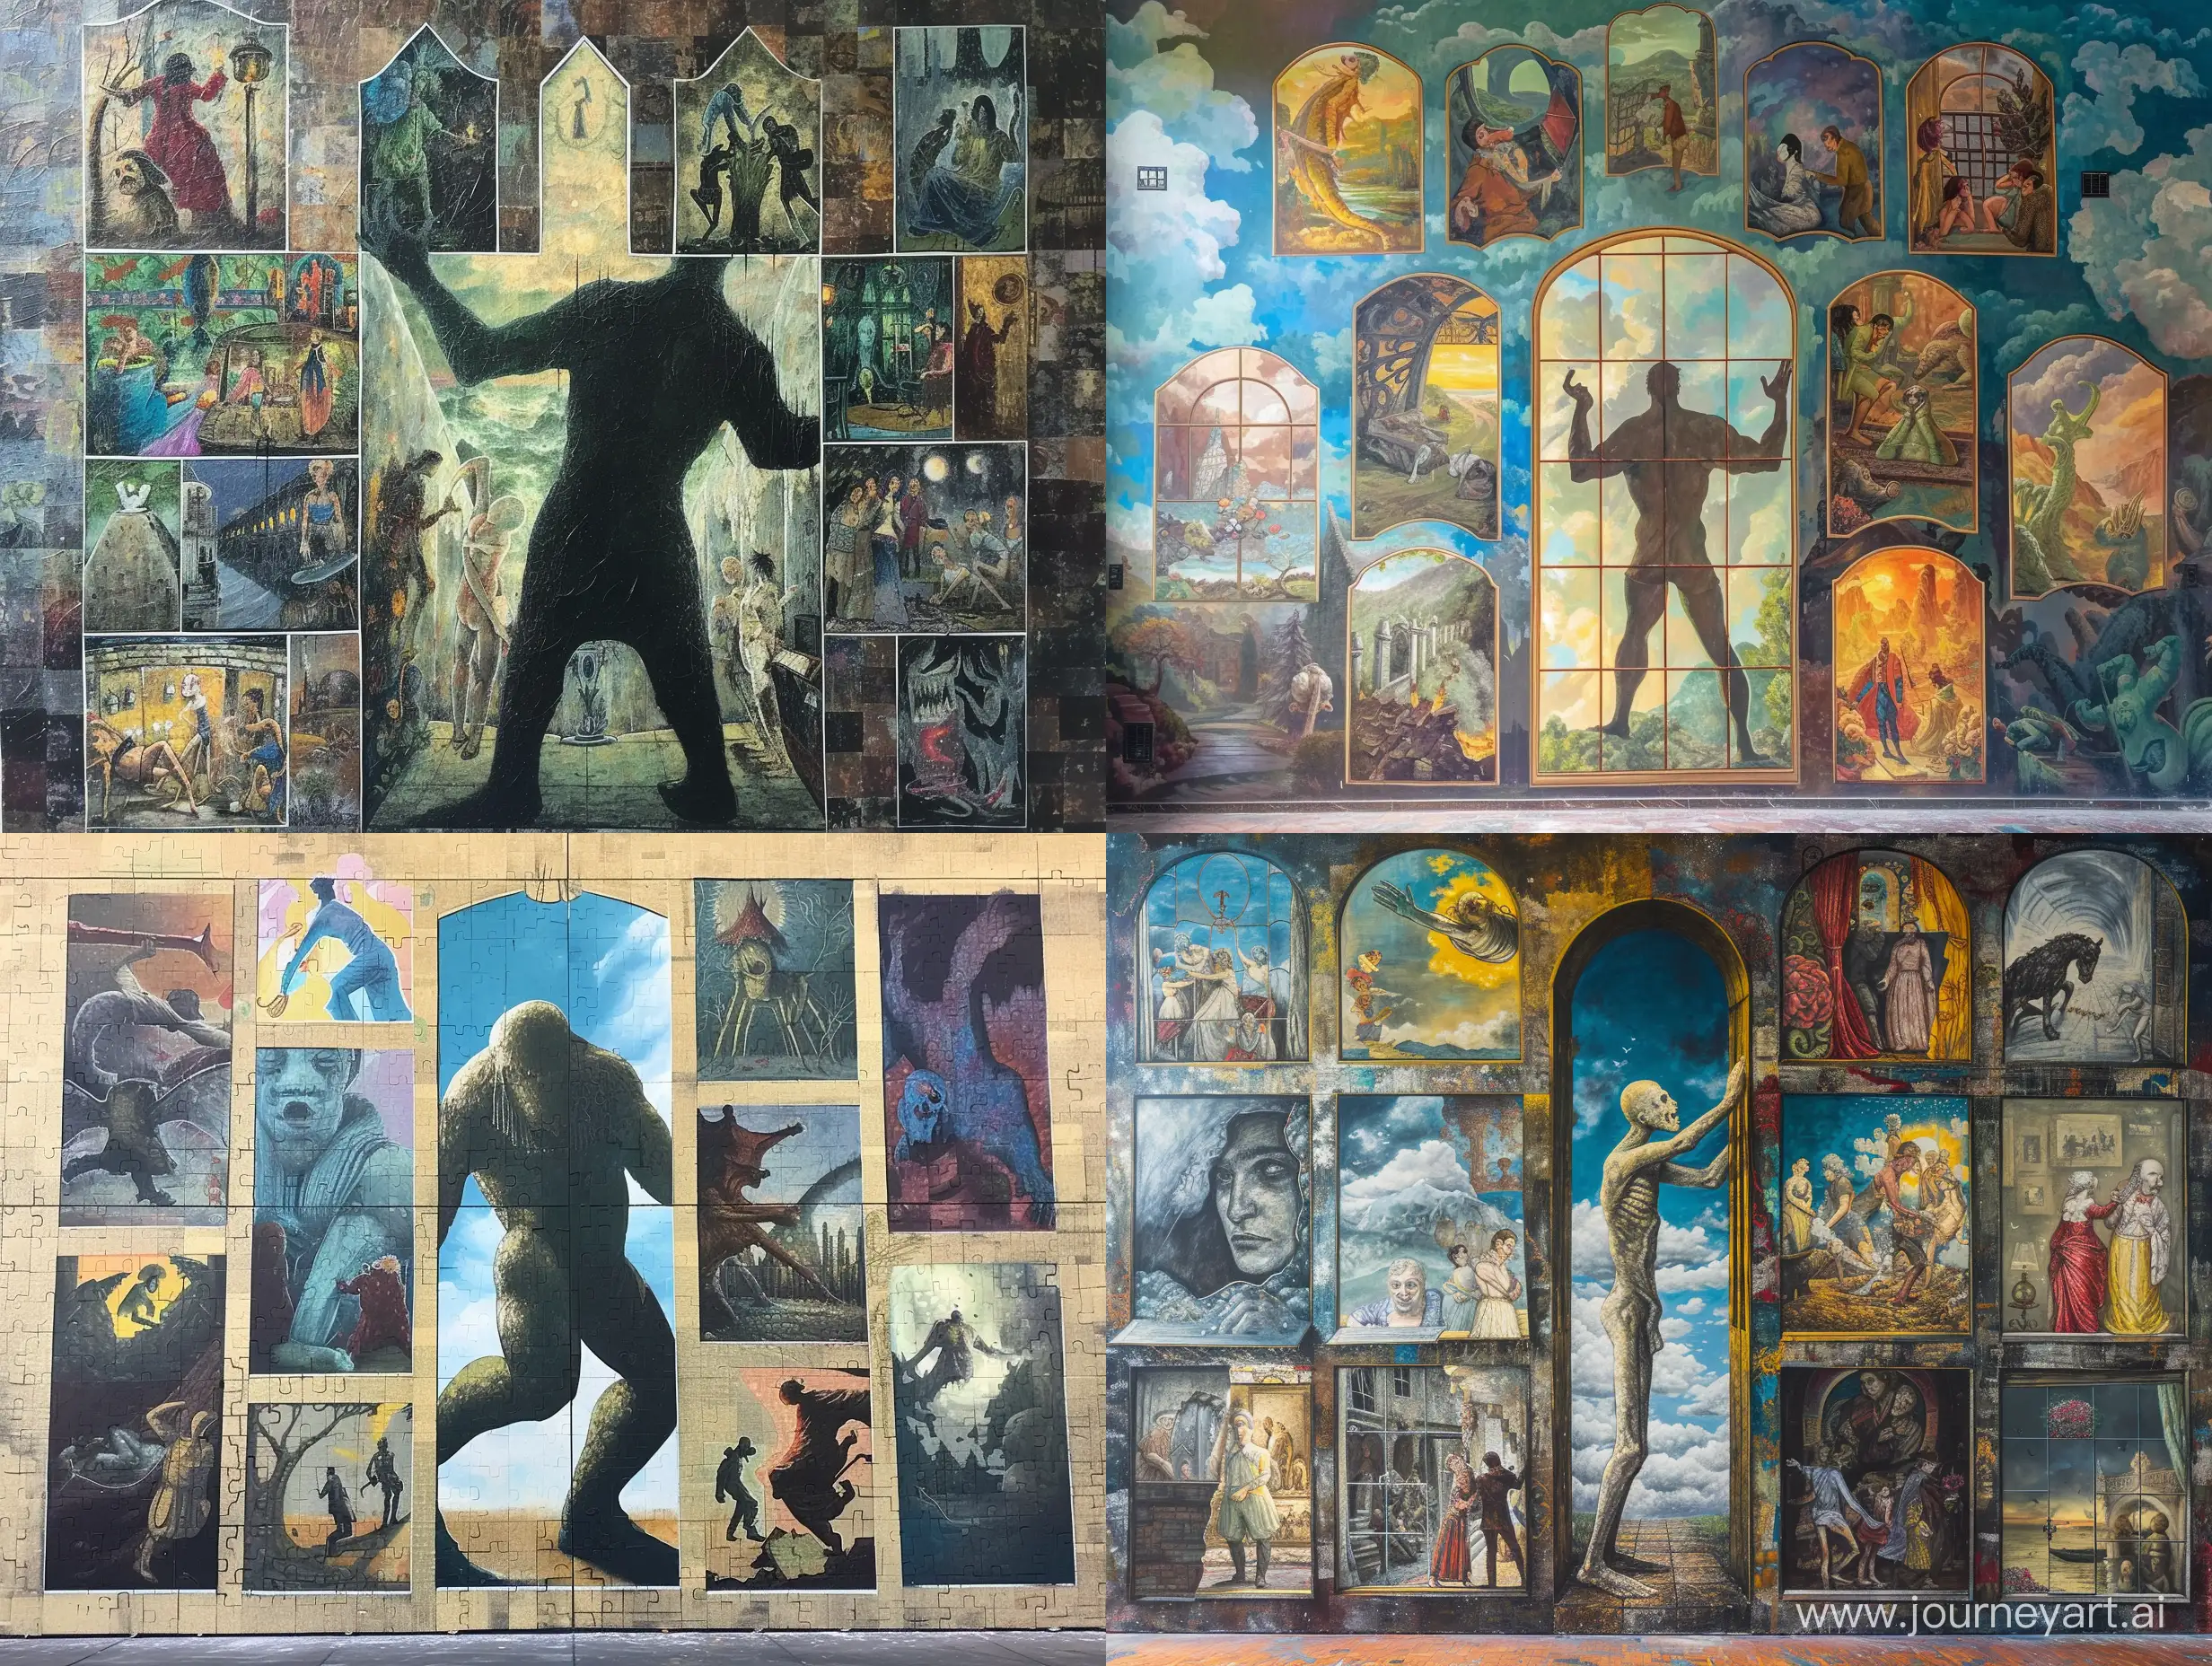 "Wall of Imagination": Create a mural depicting a giant figure opening a window to the imagination. Various scenes emerge from each window, from grotesque to mystical, showcasing the diversity of human dreams and desires.